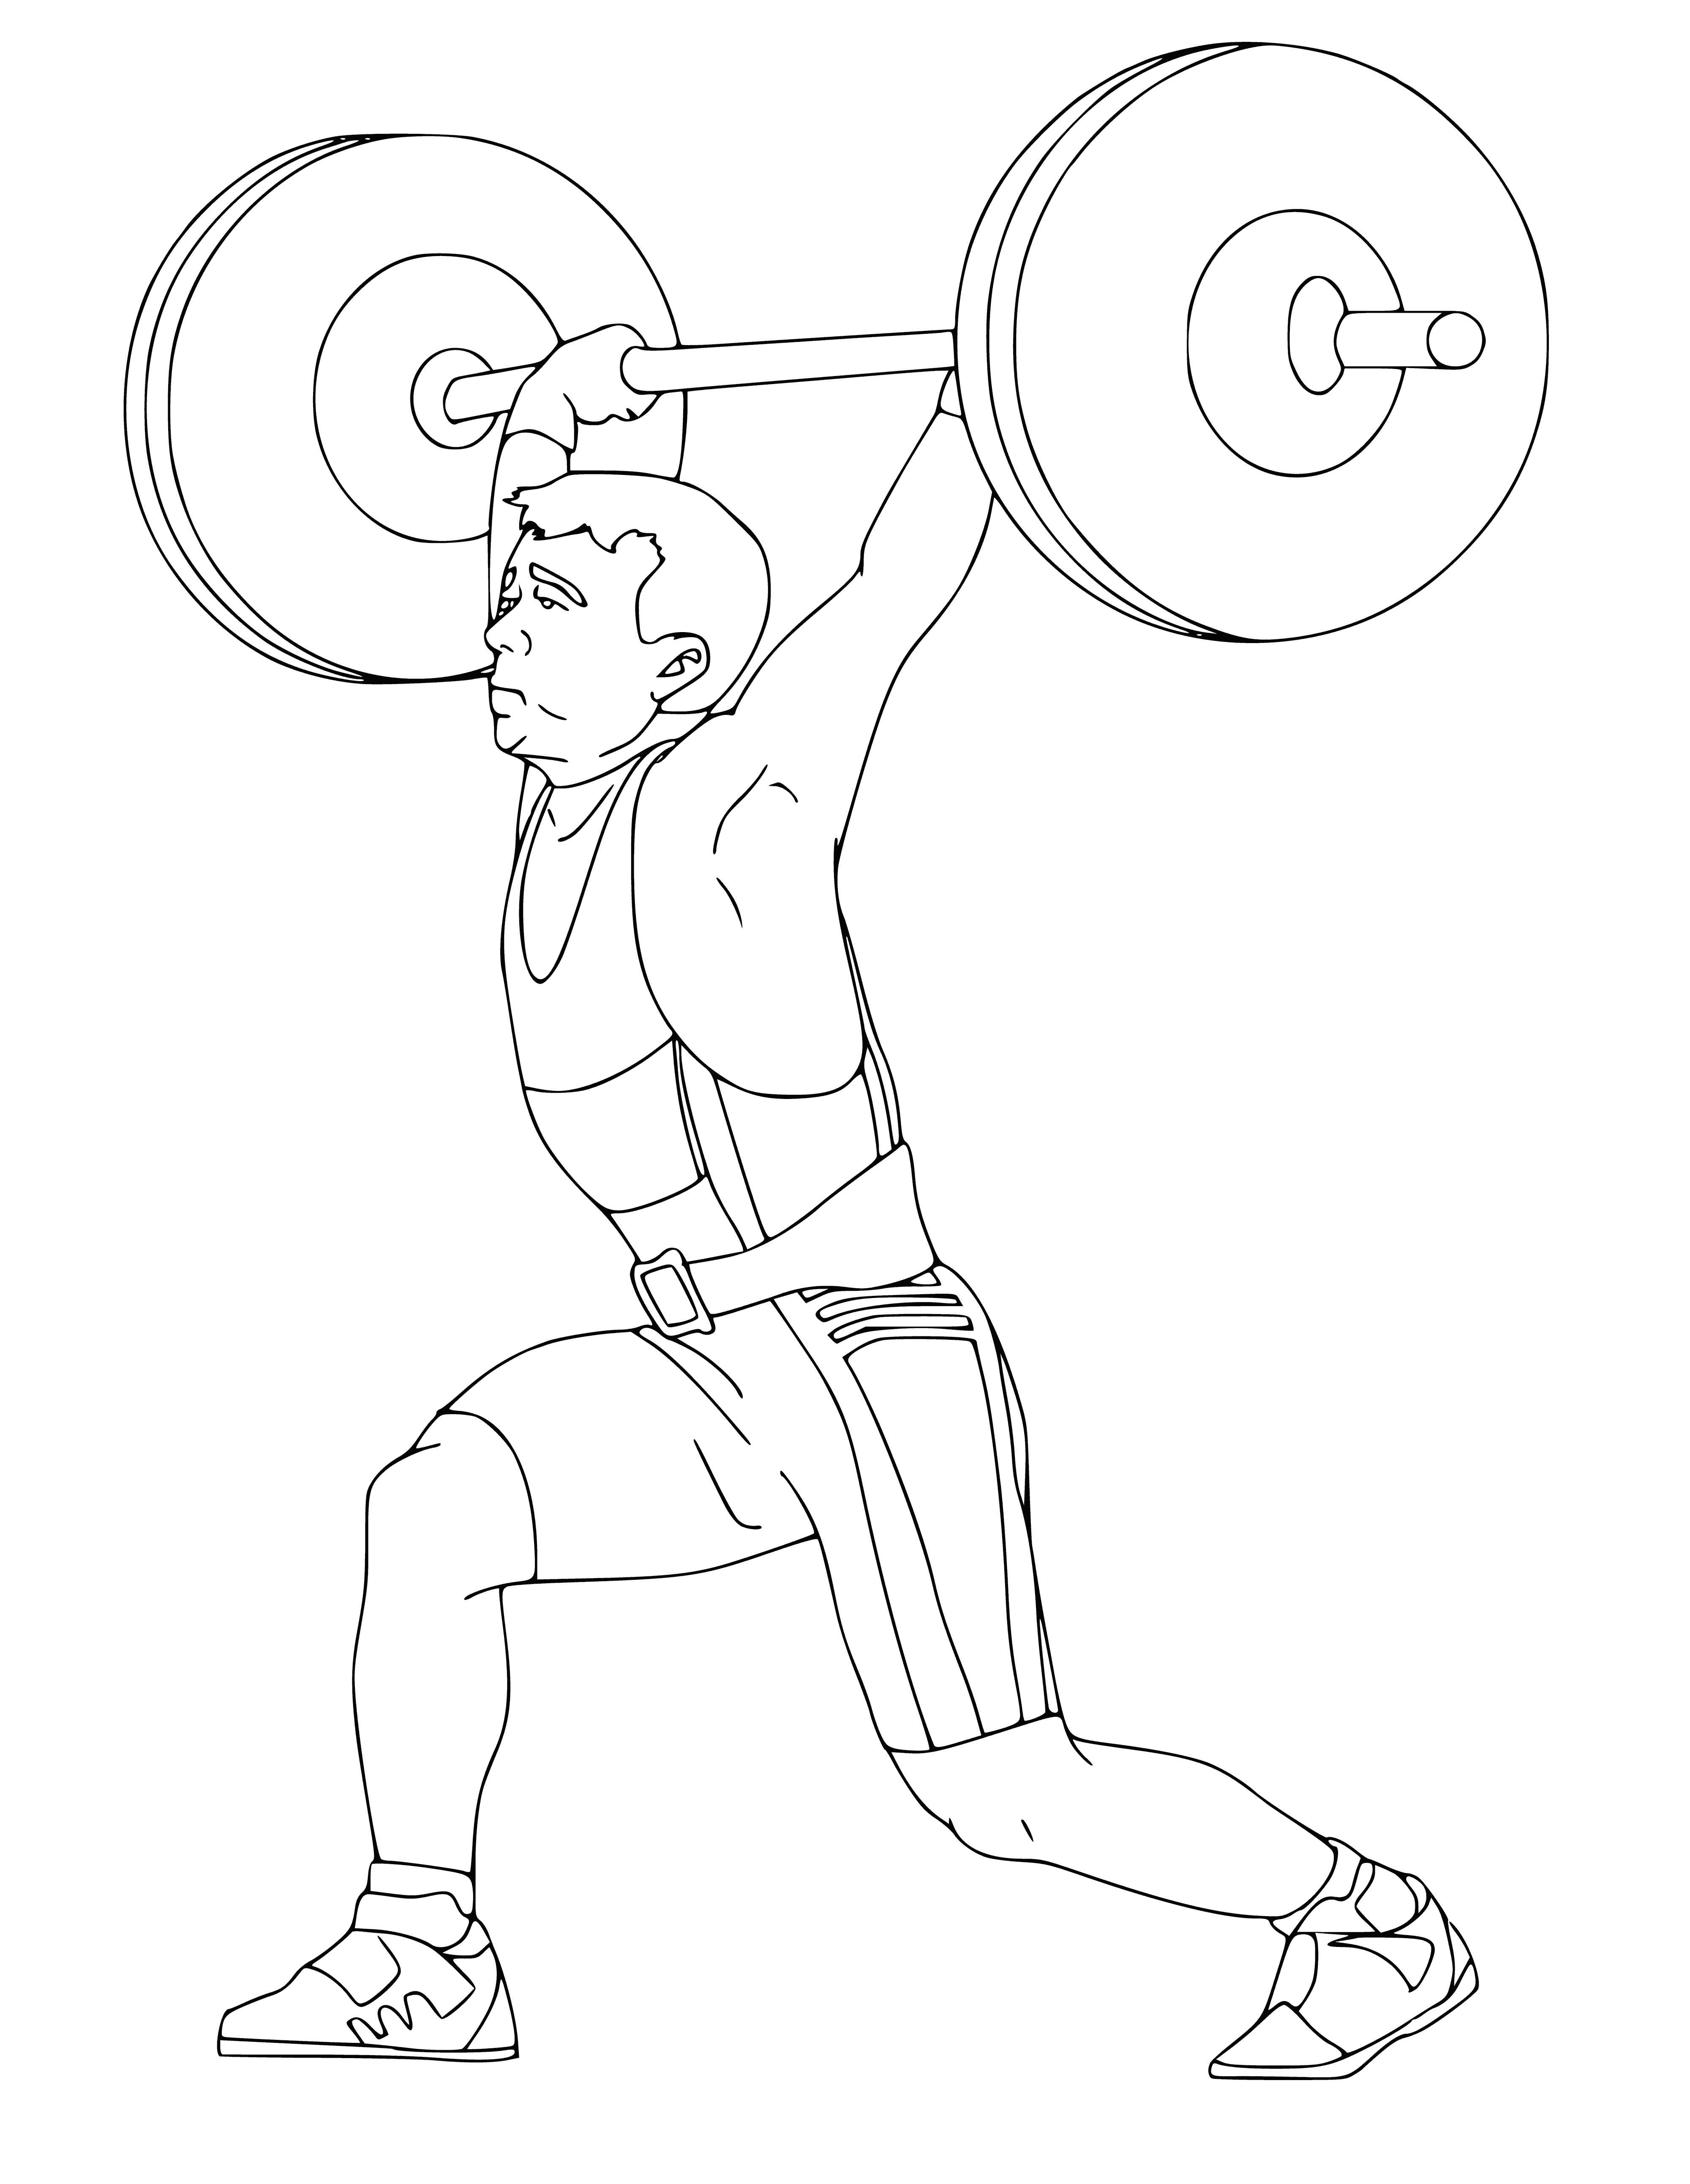 coloring page: Weightlifter in blue/white USA uniform holds two heavy weights in hands. #weightlifting